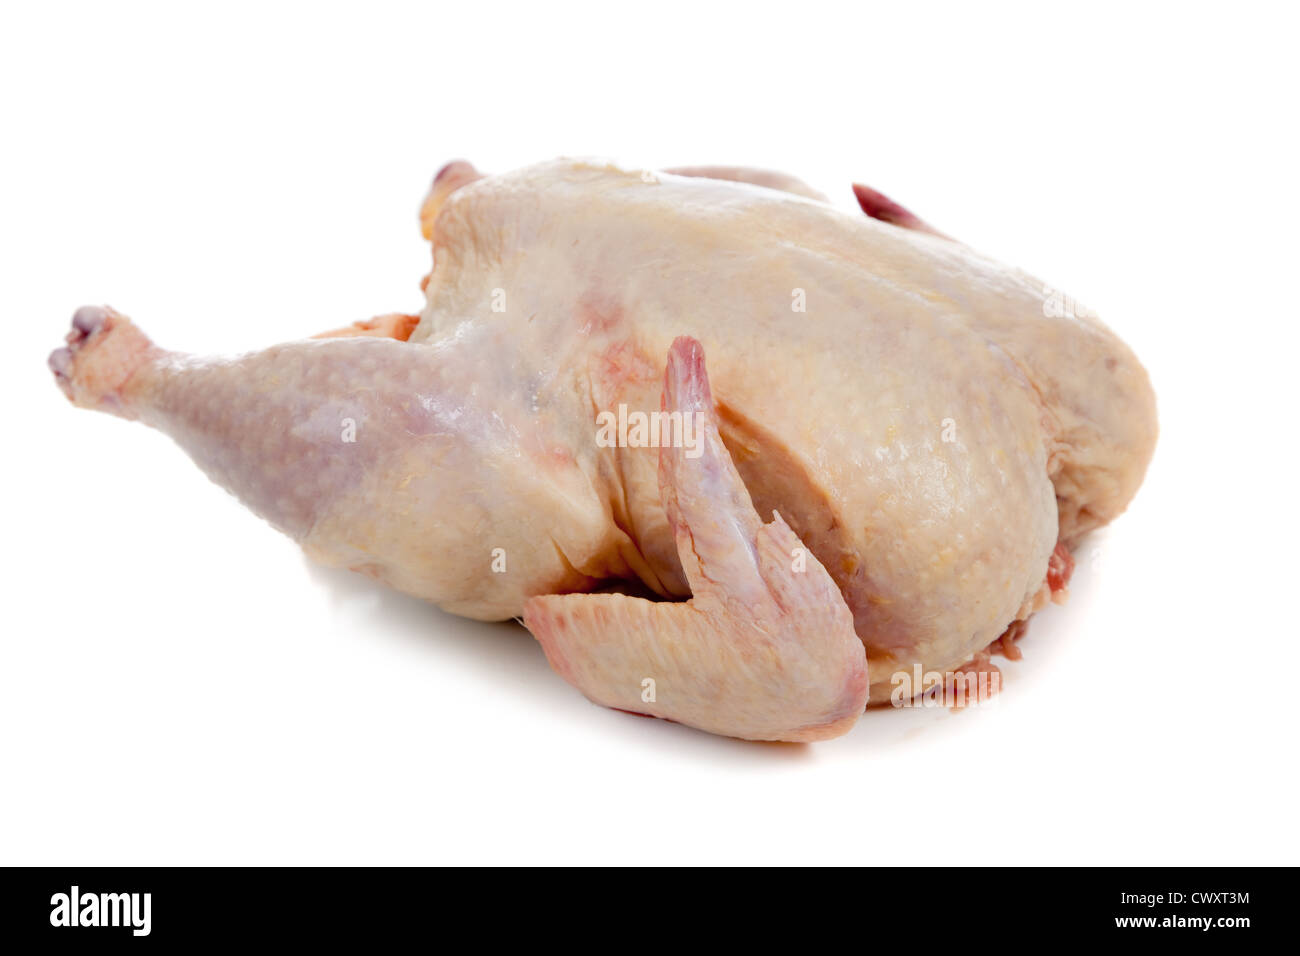 A whole raw chicken on a white background Stock Photo